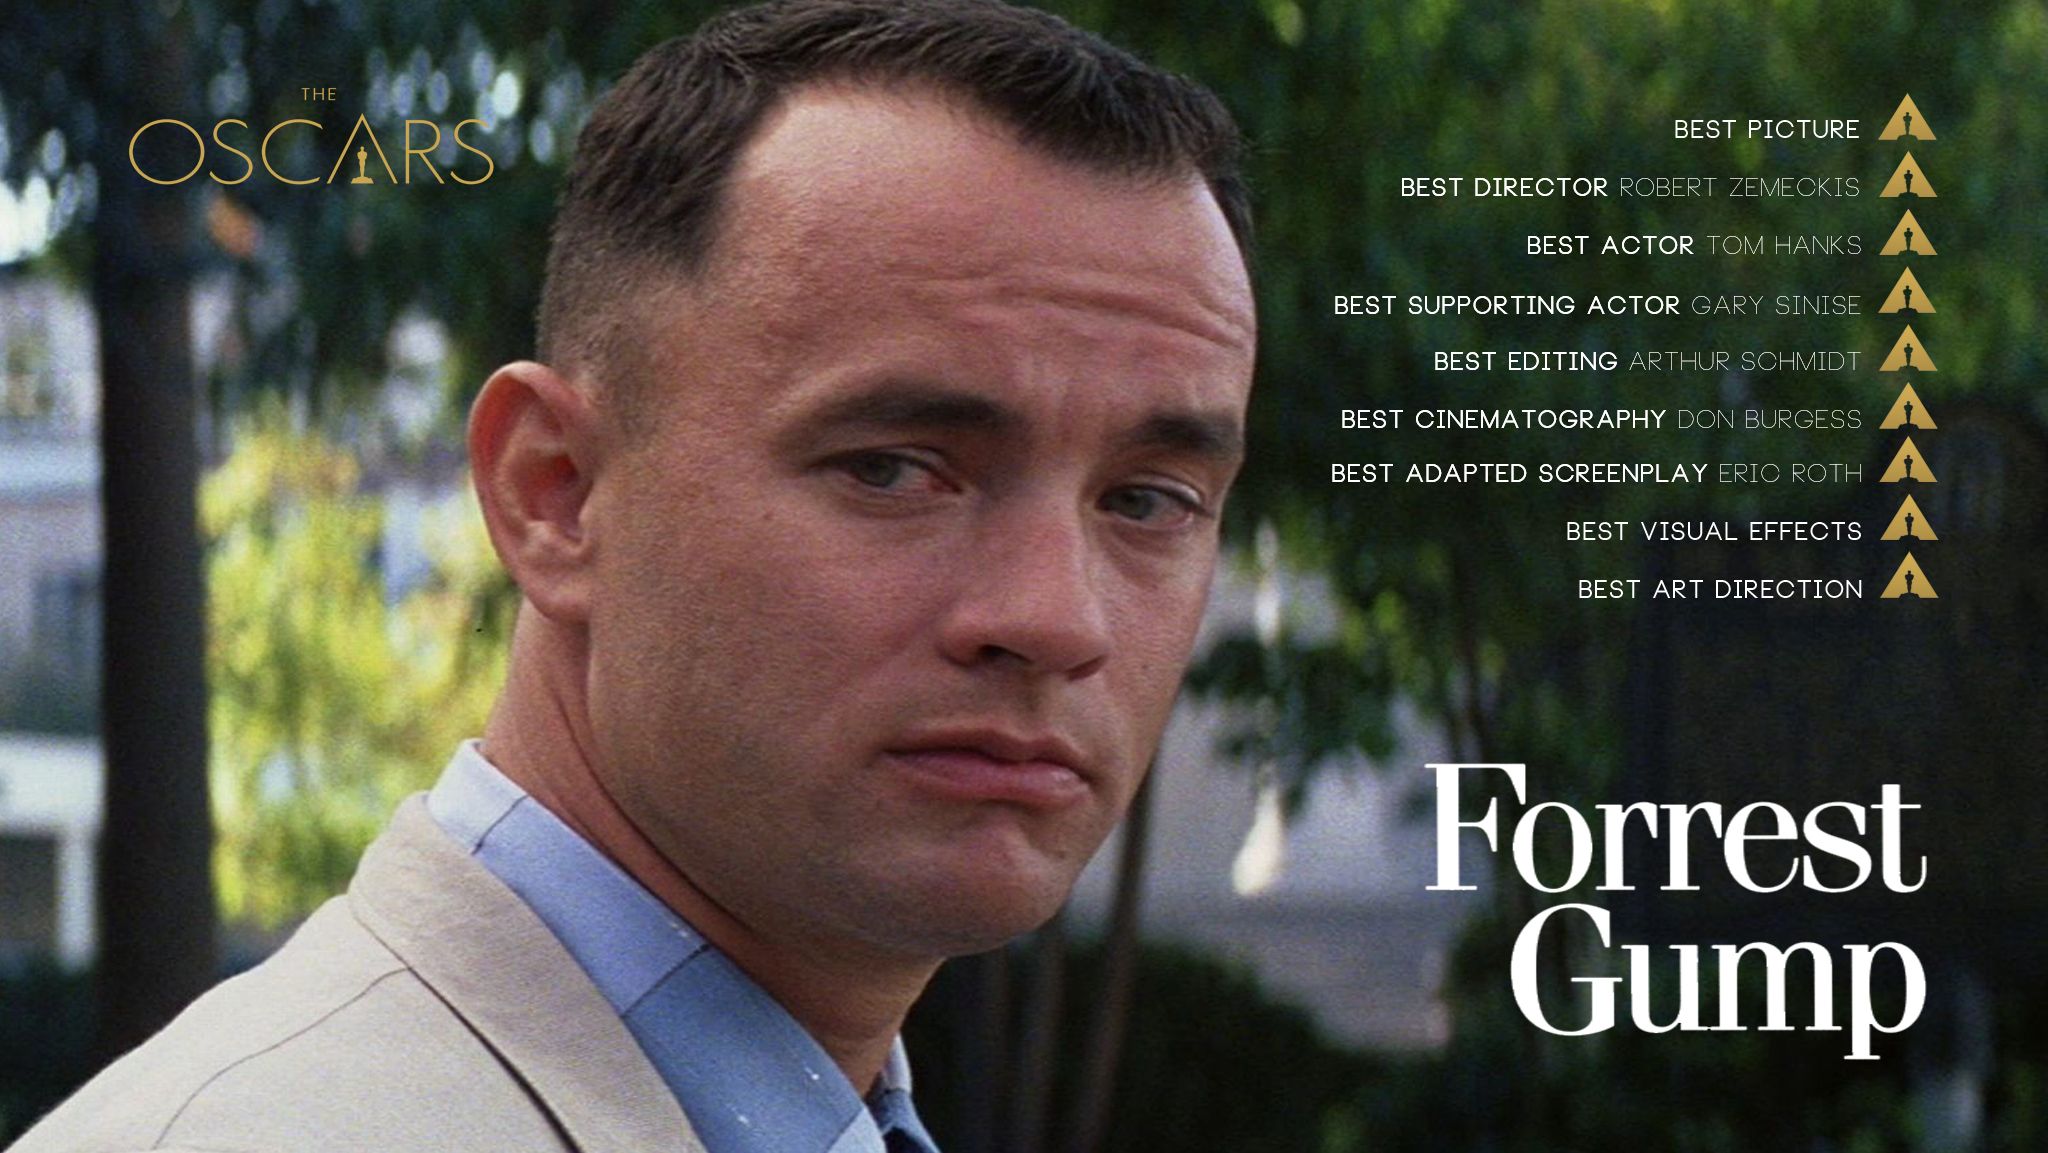 Fun Facts: Forrest Gump